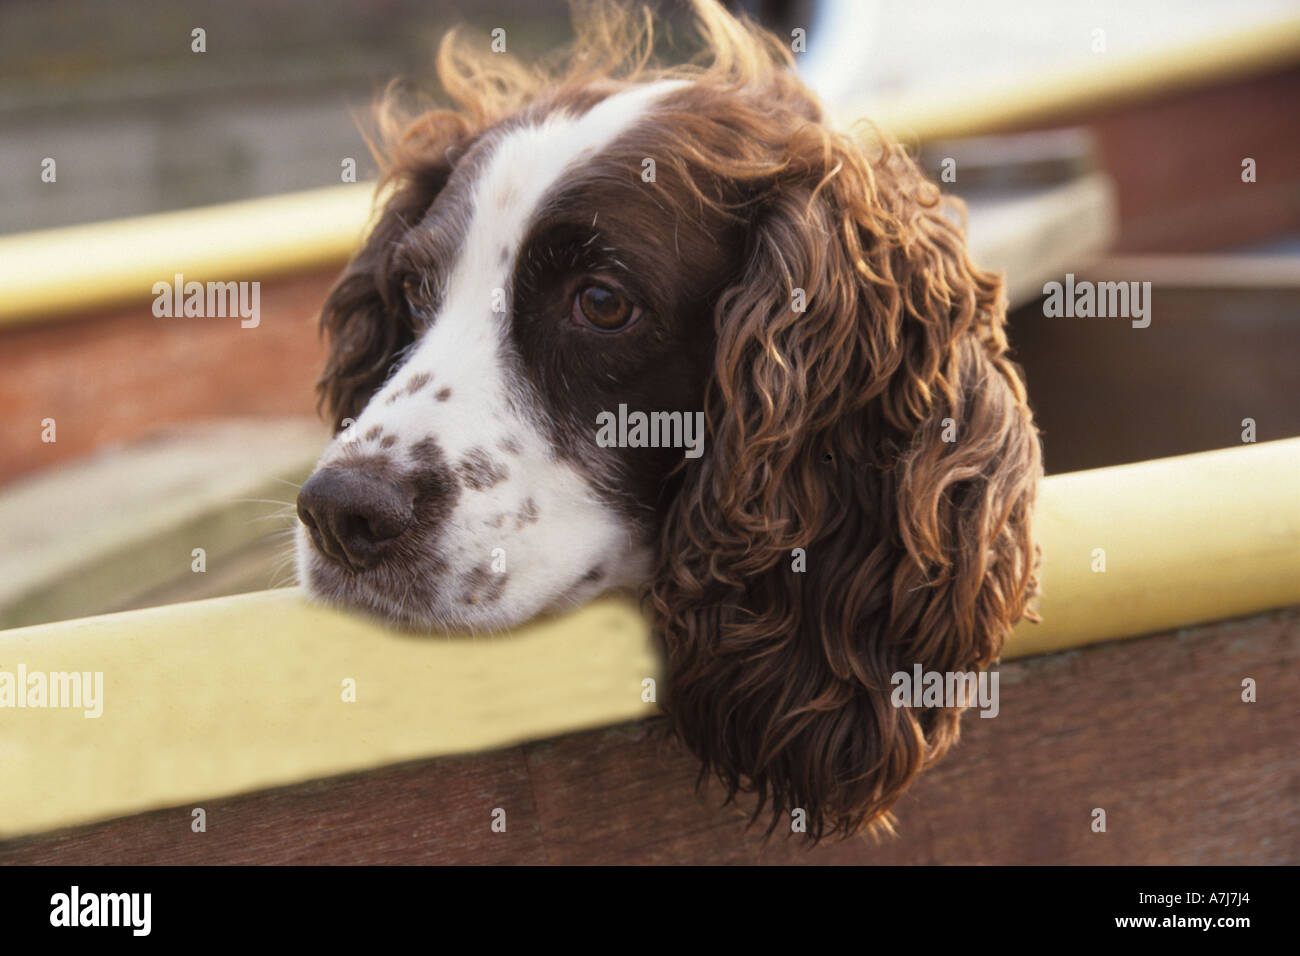 english springer spaniel dog waiting patiently in a boat Stock Photo